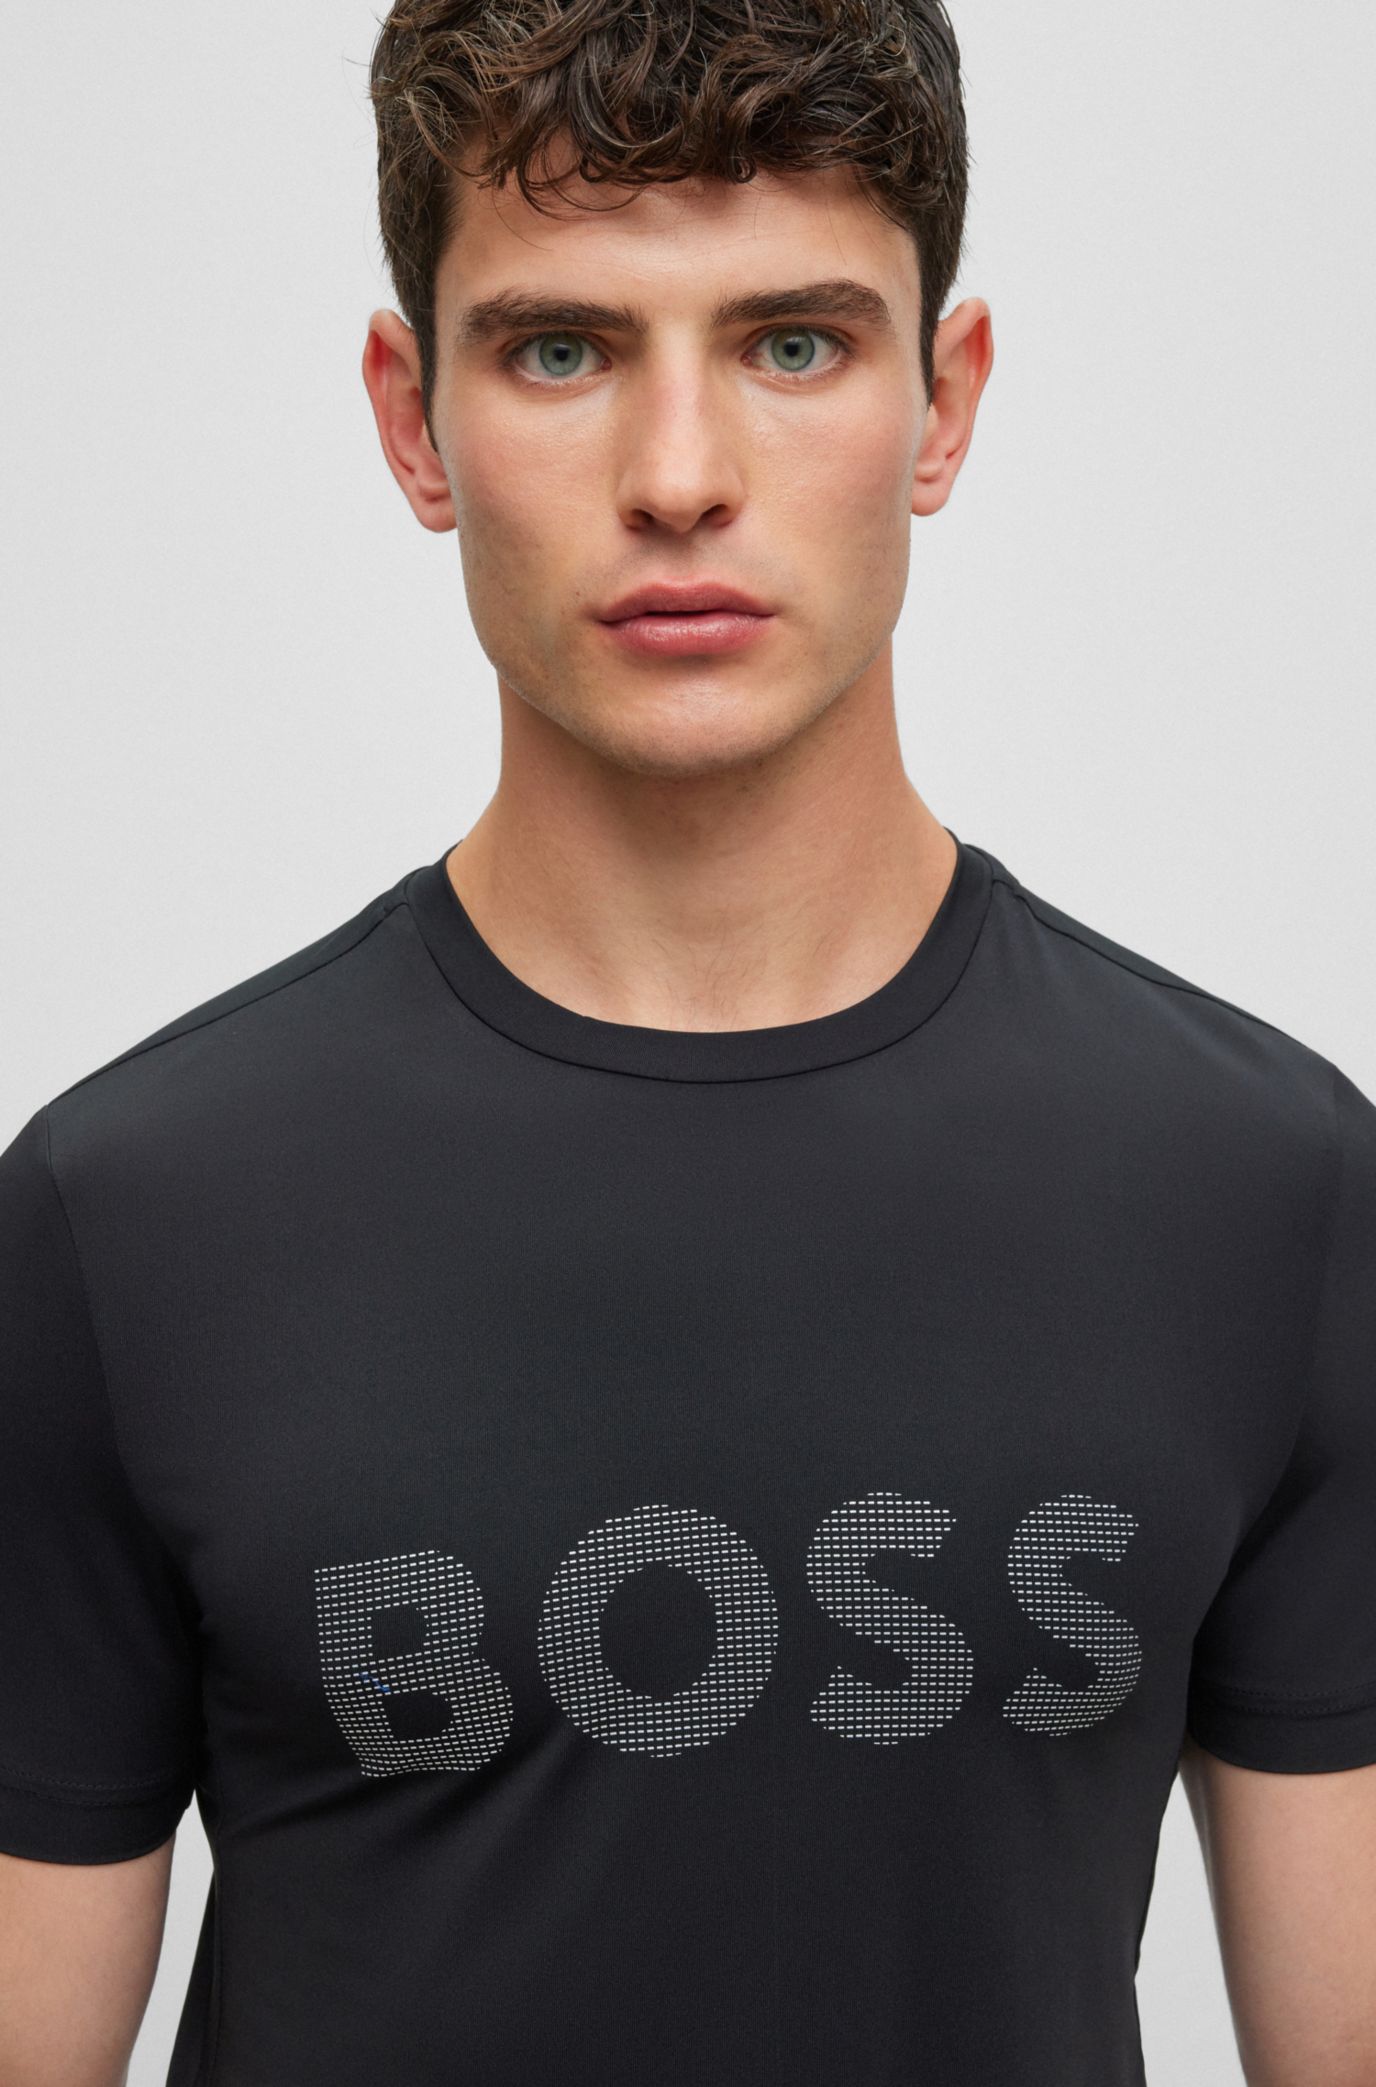 BOSS - reflective logo T-shirt decorative Slim-fit with